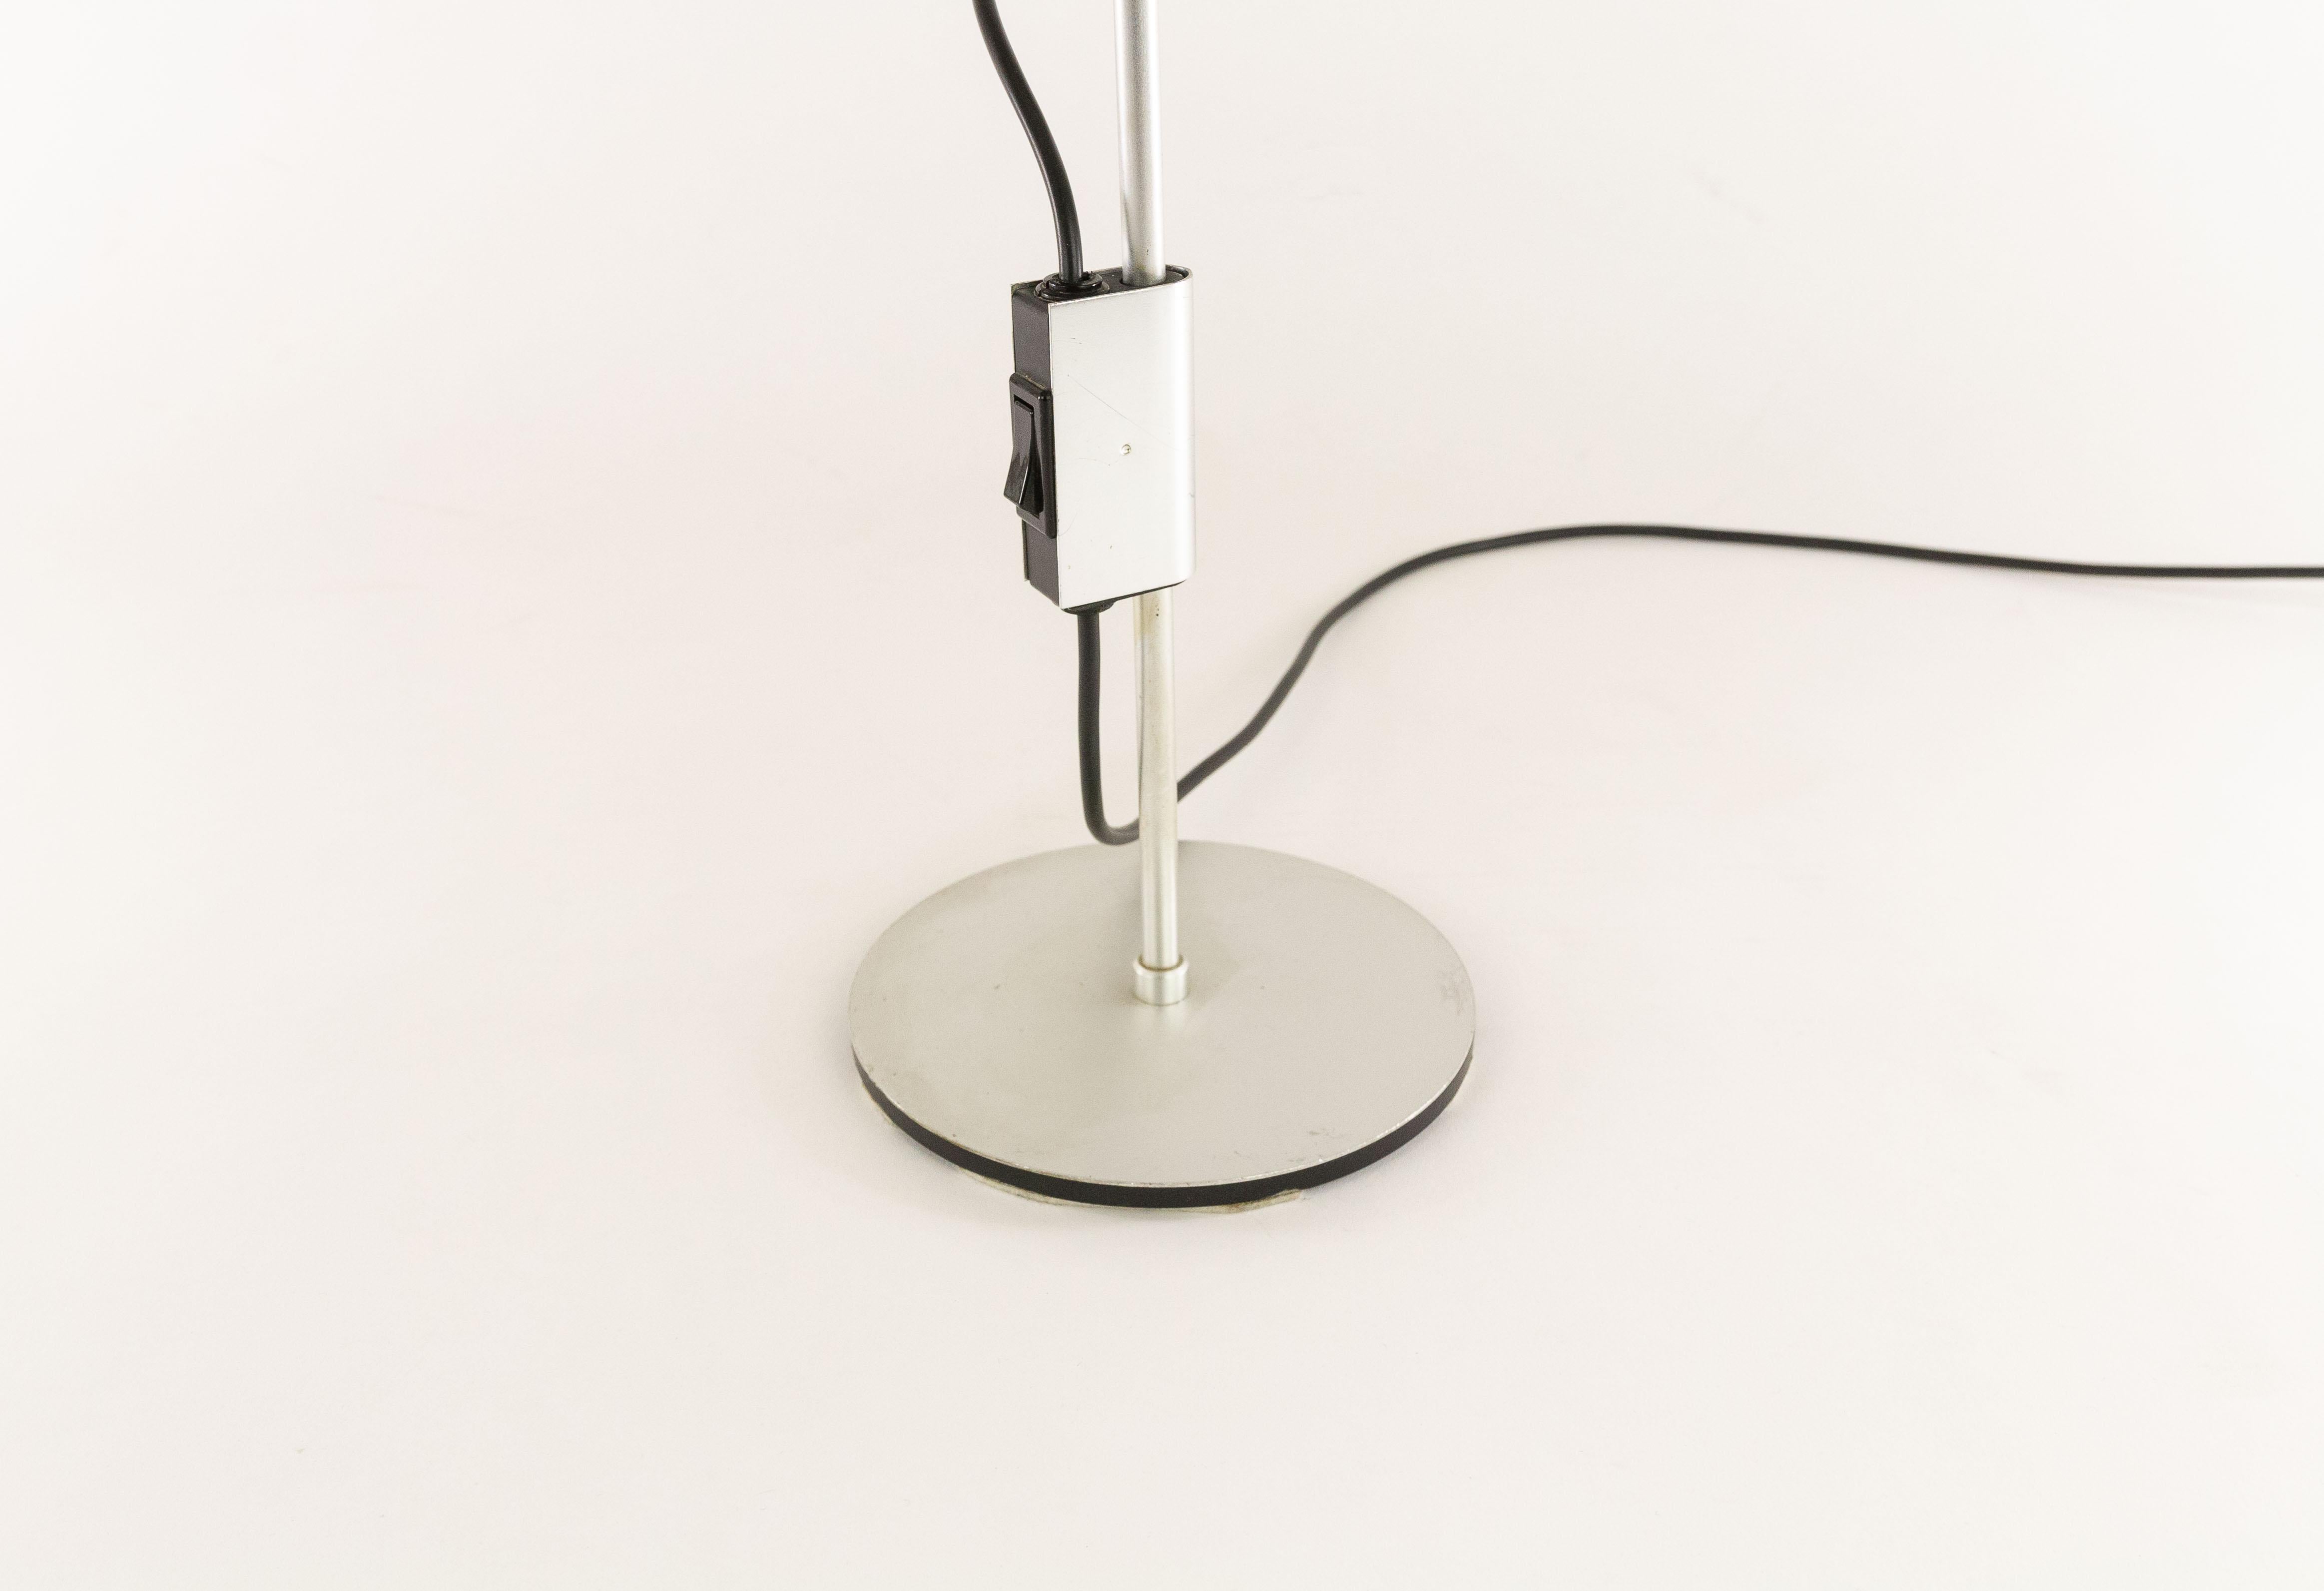 Mid-Century Modern Aluminum Table Lamp by Ronald Homes for Conelight Limited, 1960s